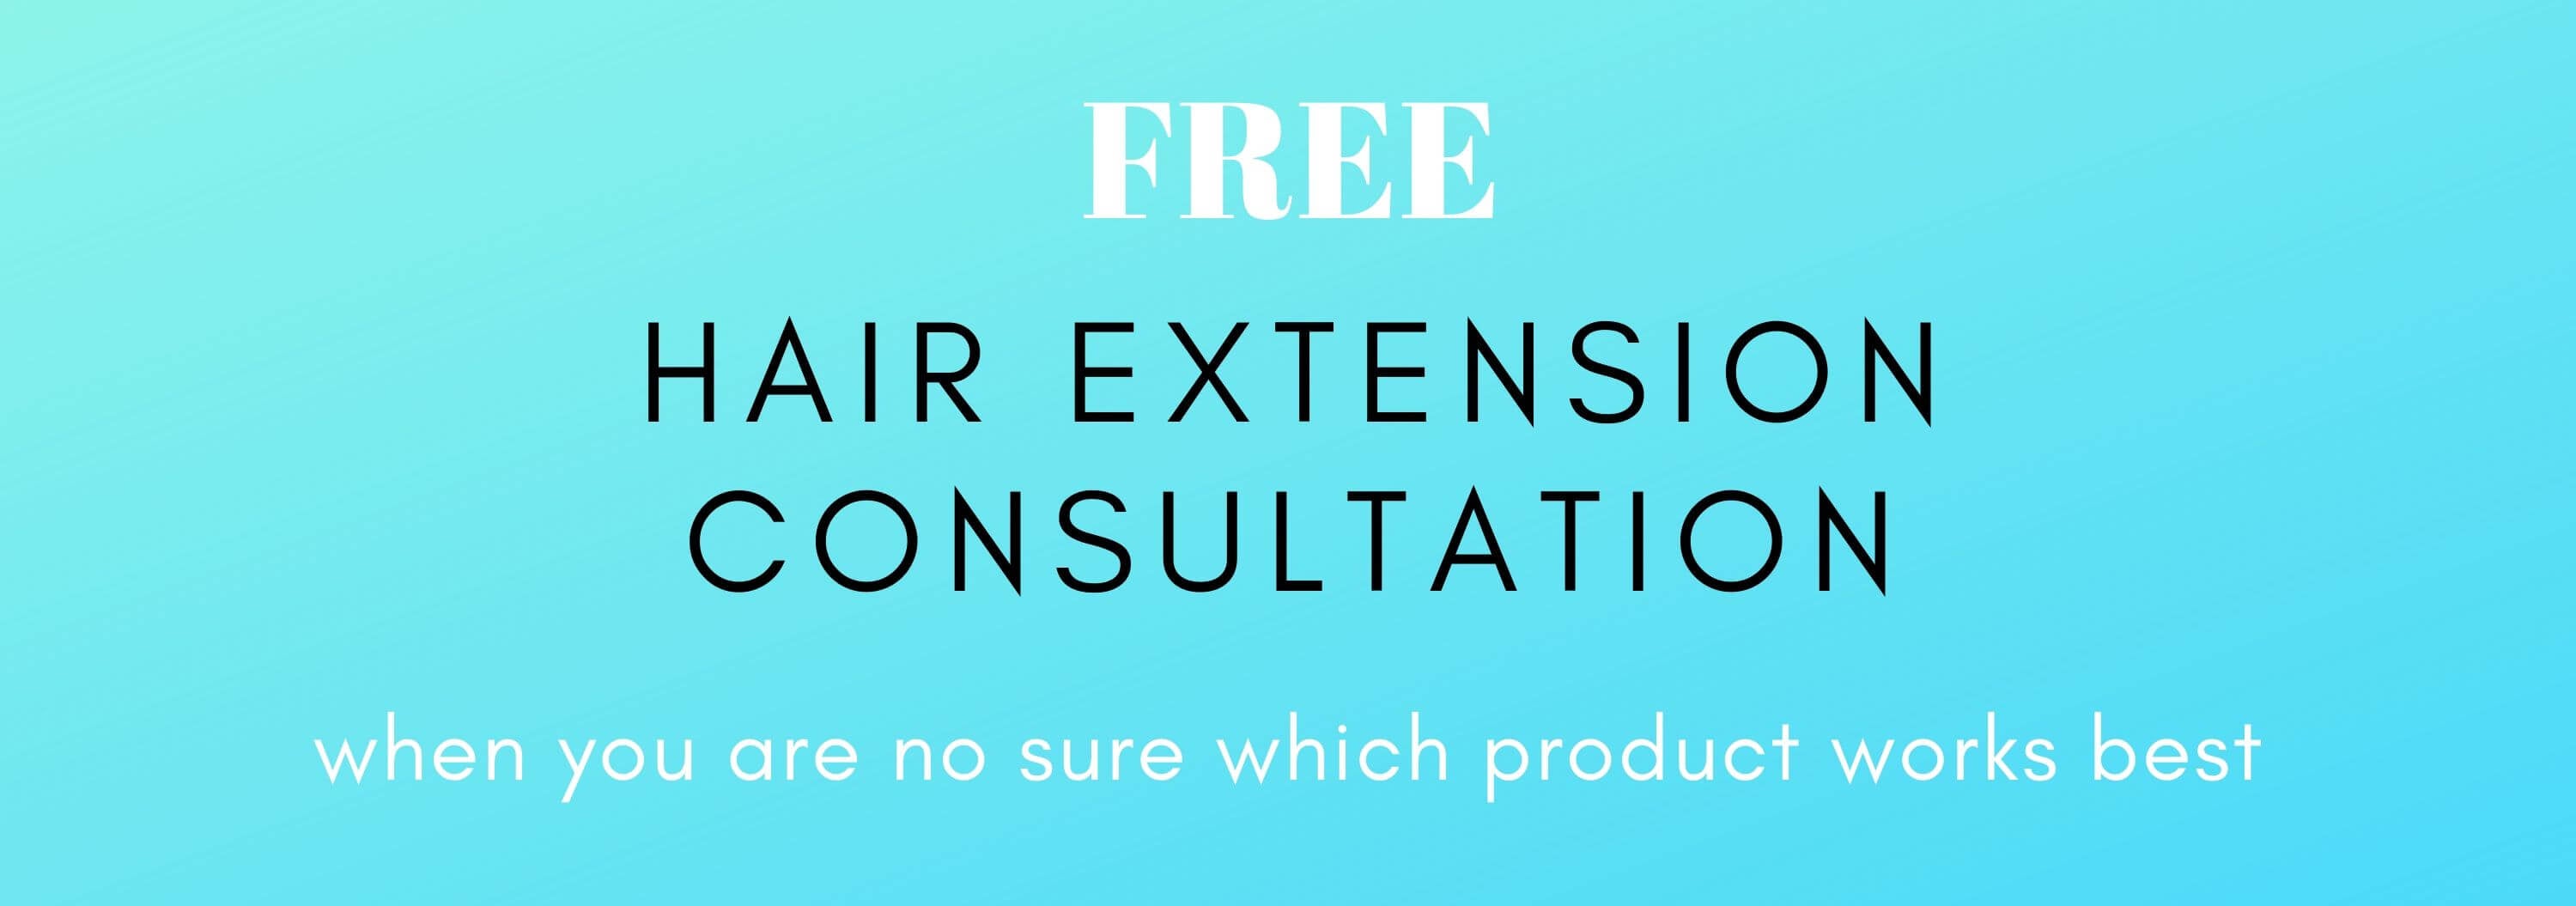 azul hair collection hair extension consultation free